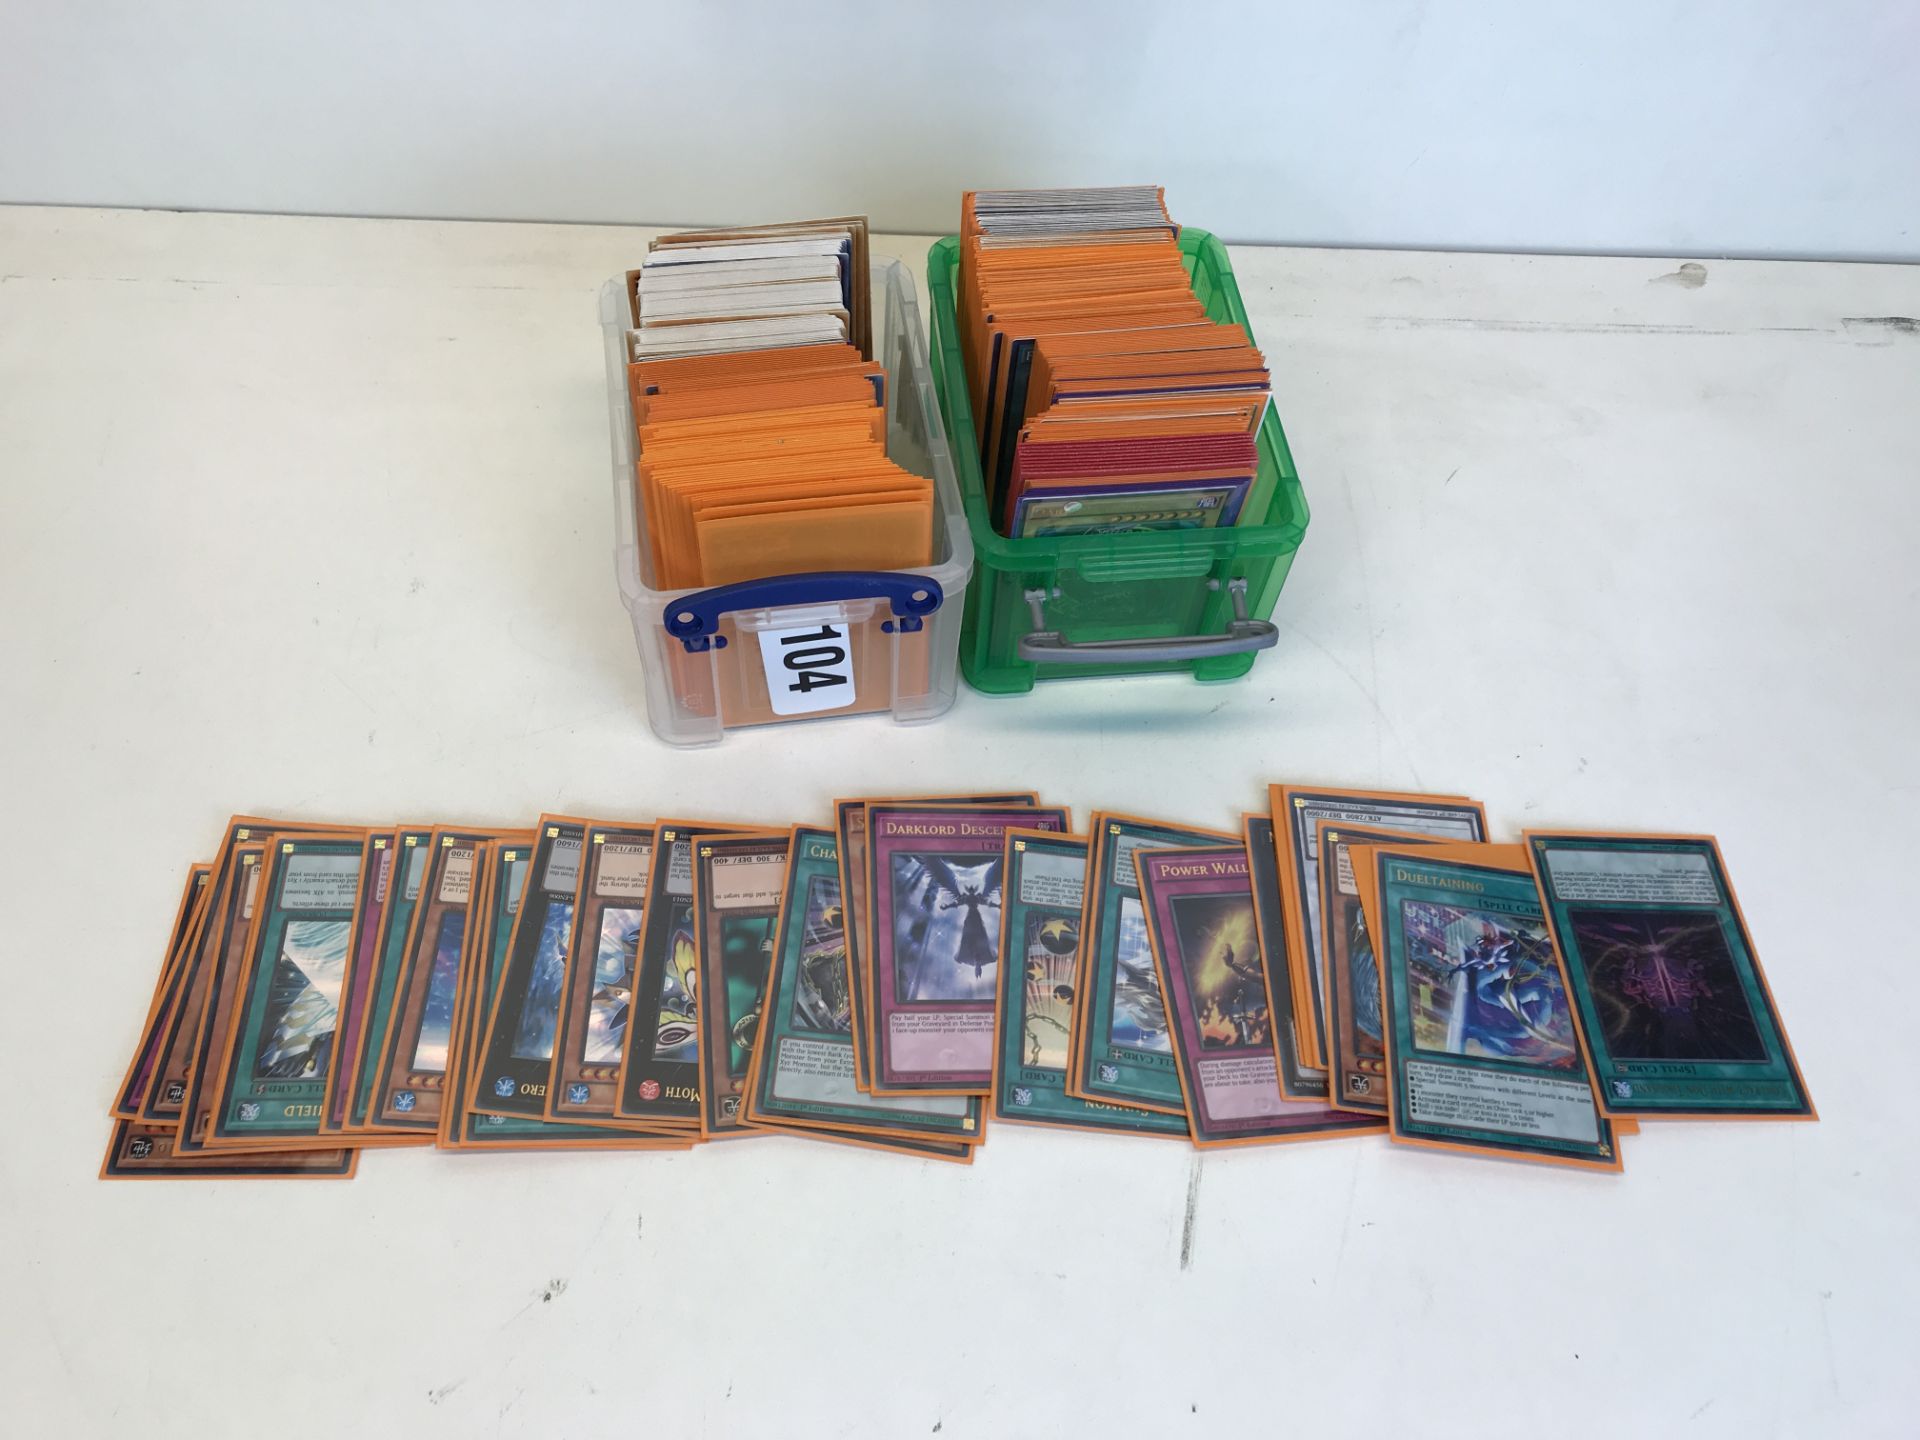 2 x Boxes of Yu-Gi-Oh! Cards